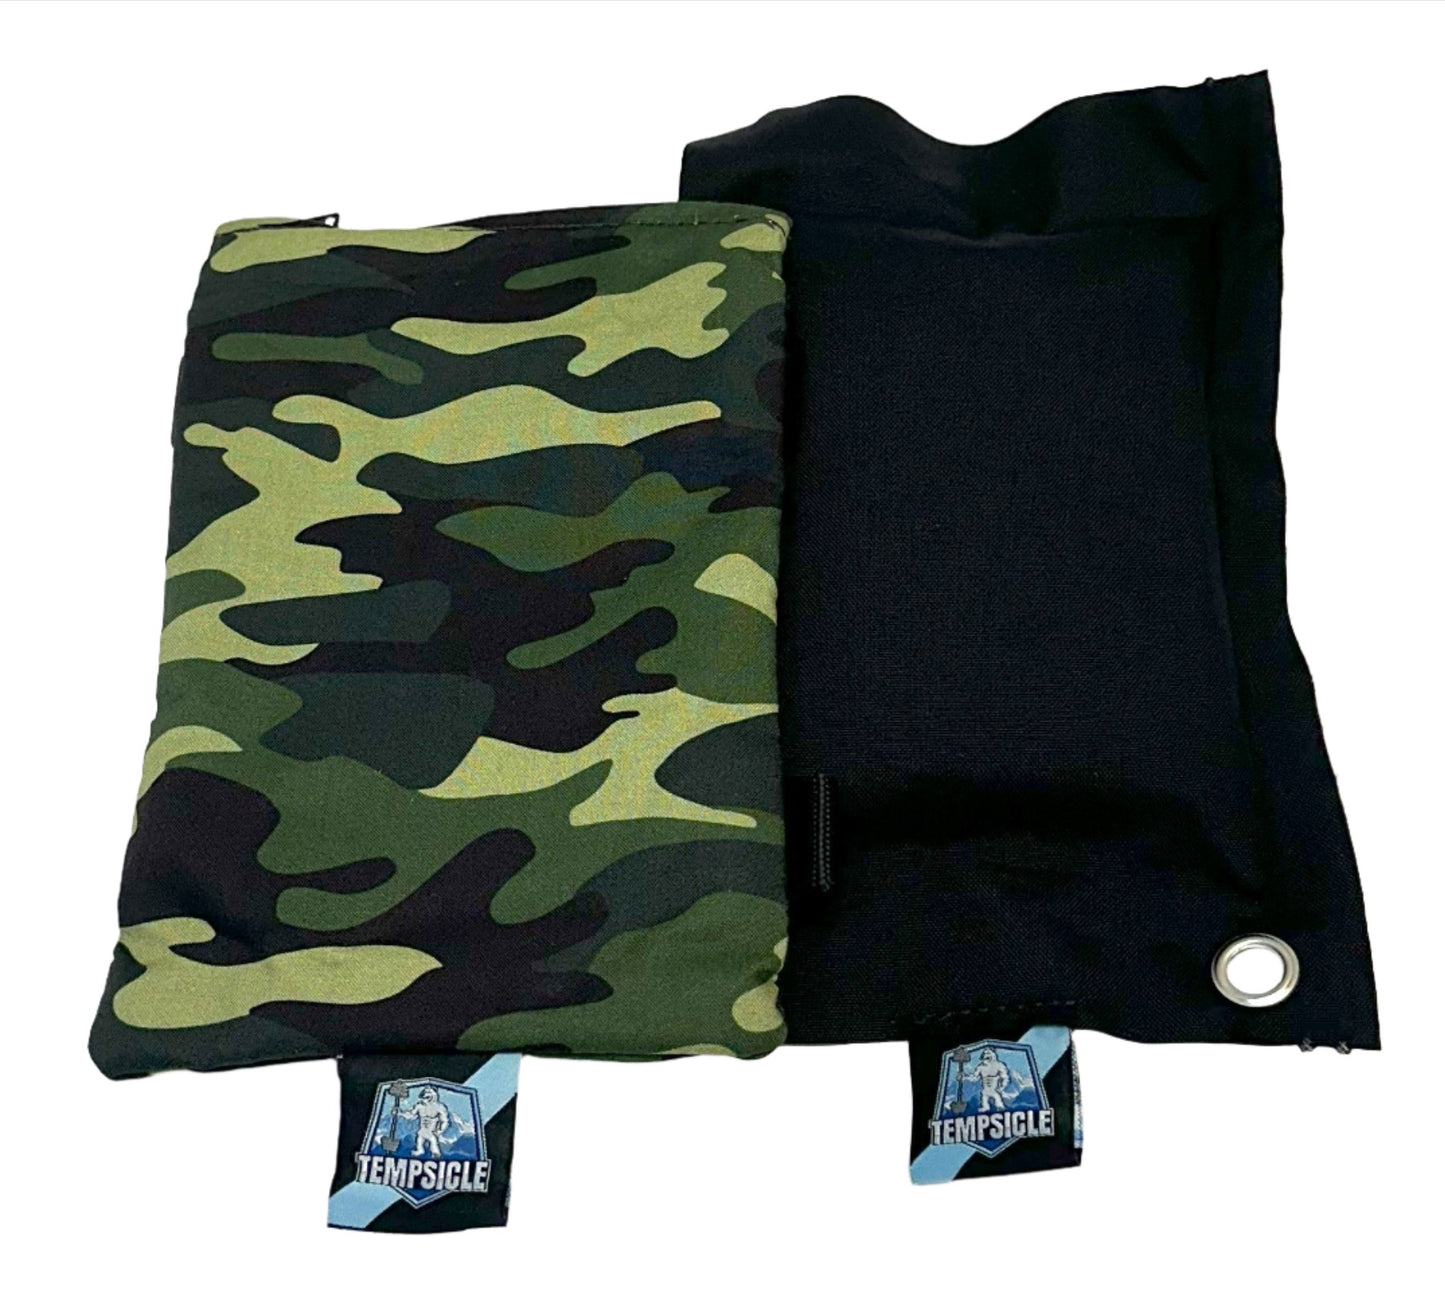 Tempsicle™ Palm Cooling Glove Classic in Green and Black Camo